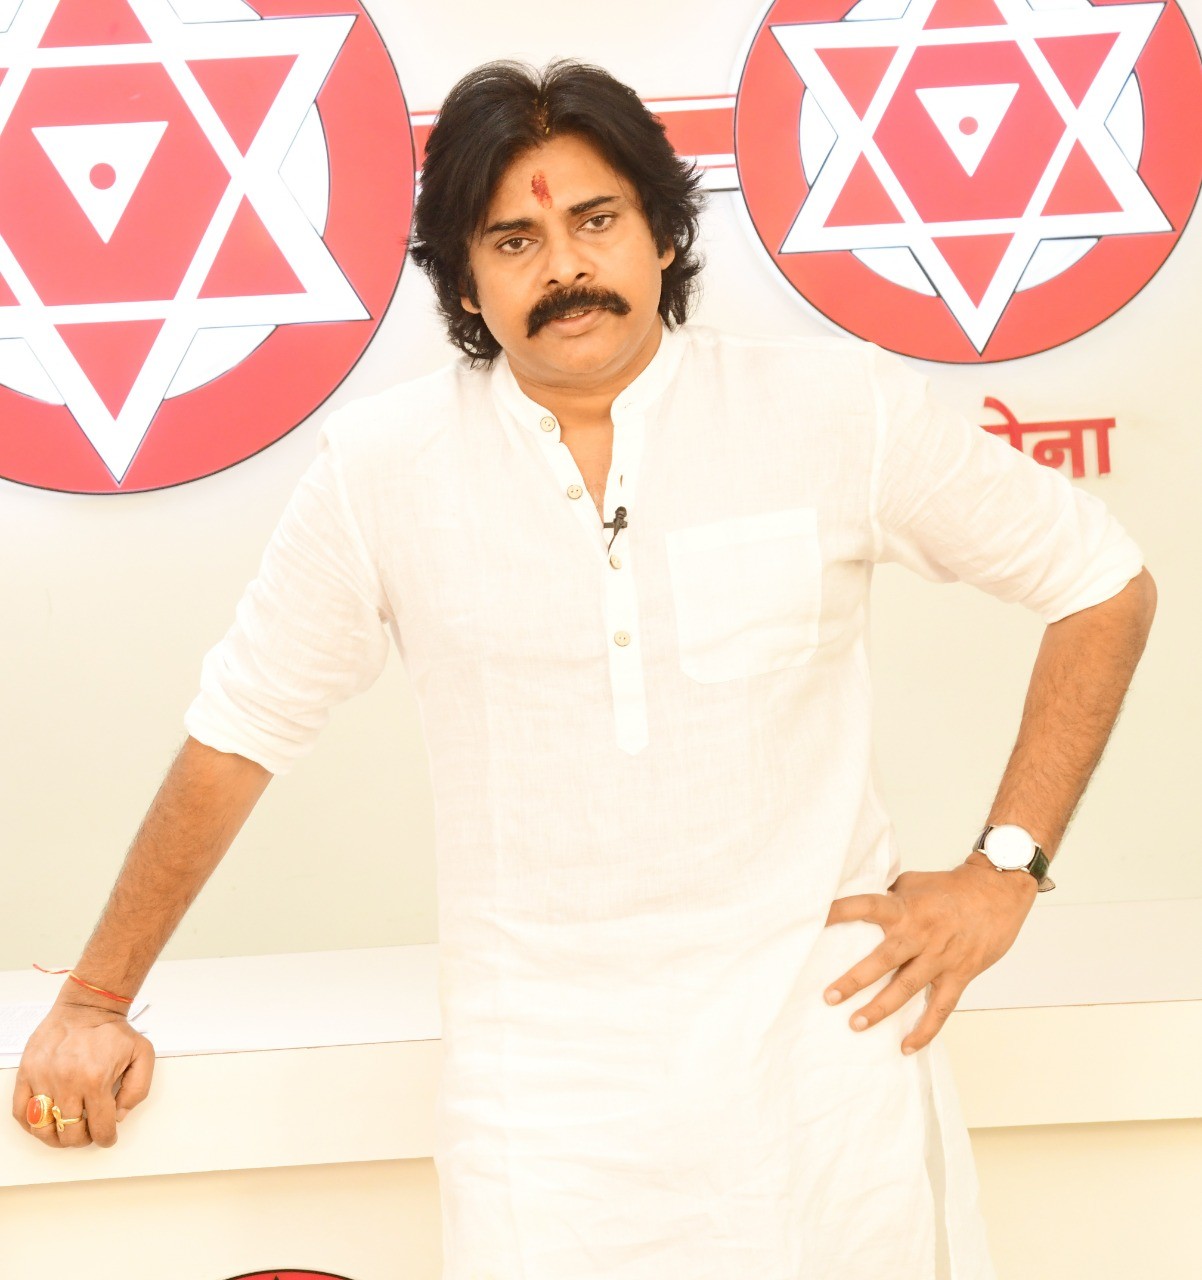 Pawan Kalyan announced financial support to suicide farmer families